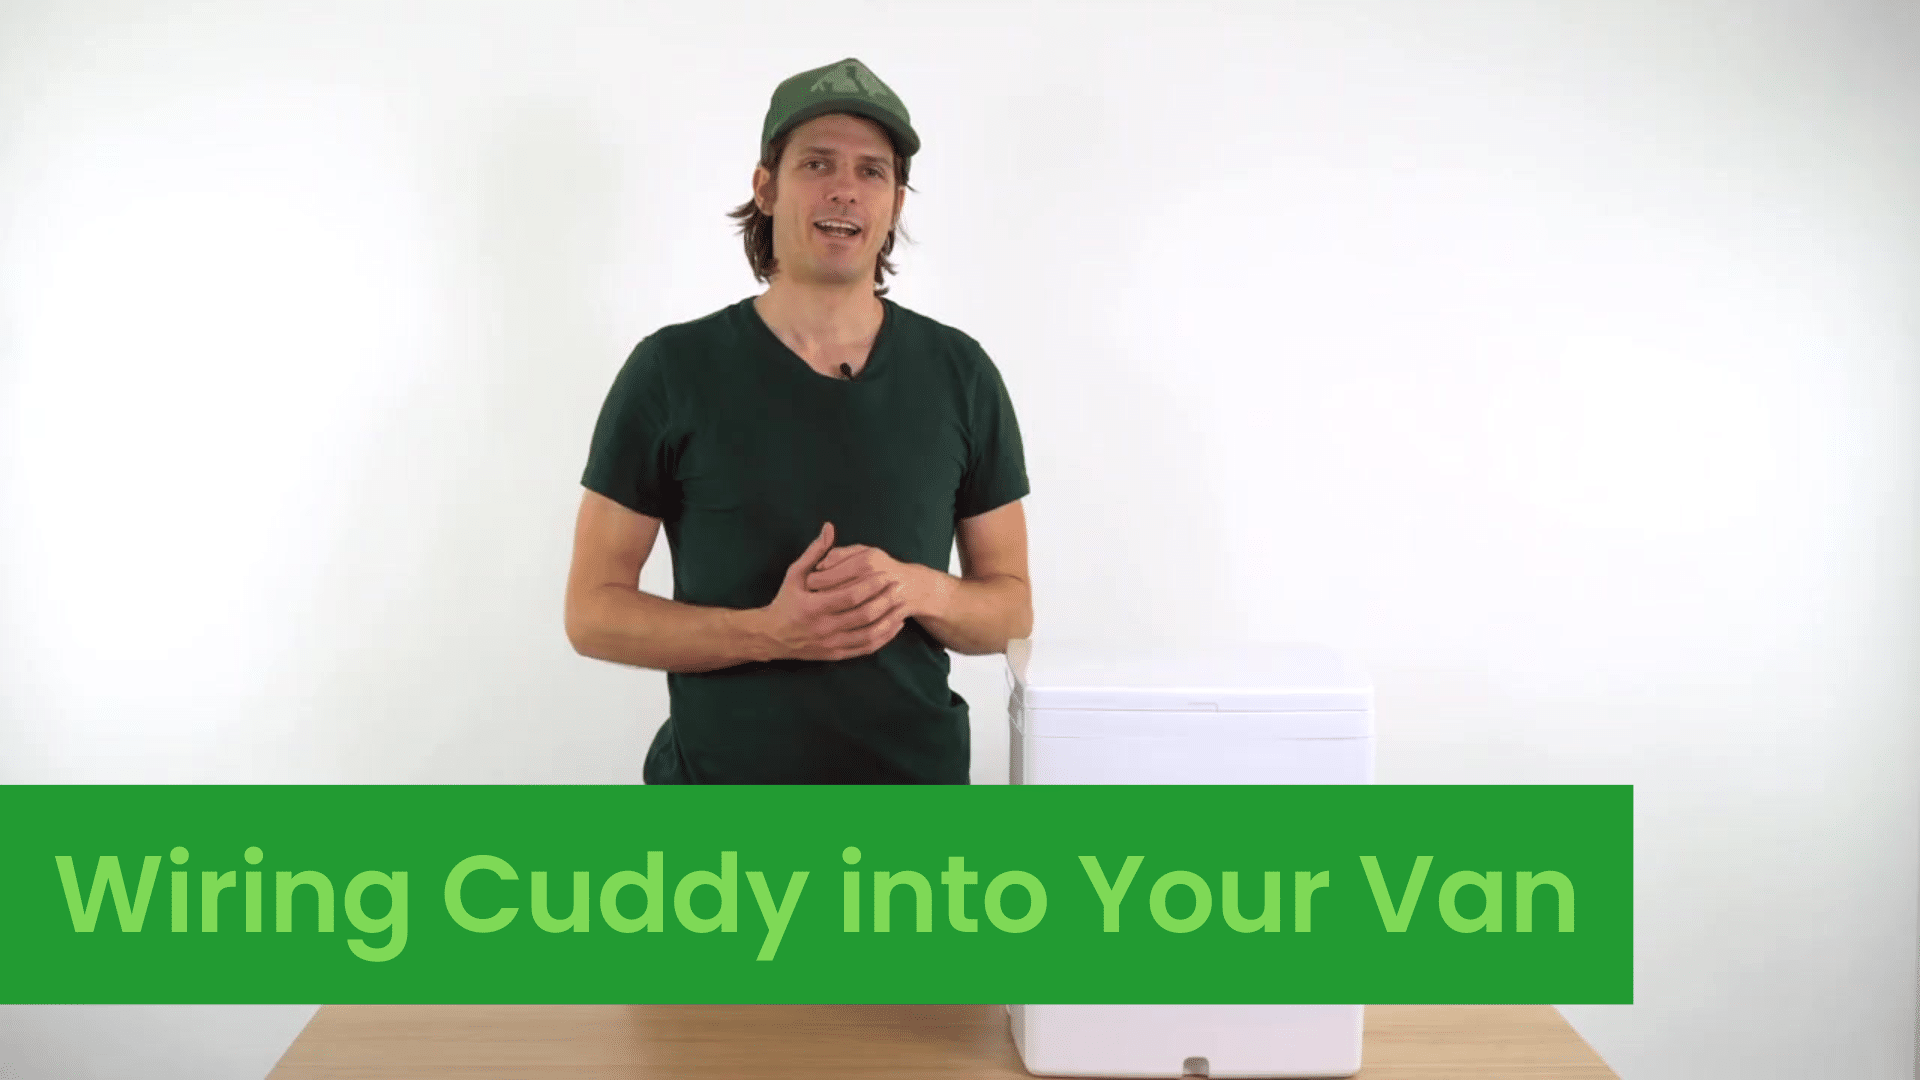 How to wire Cuddy composting toilet into your van